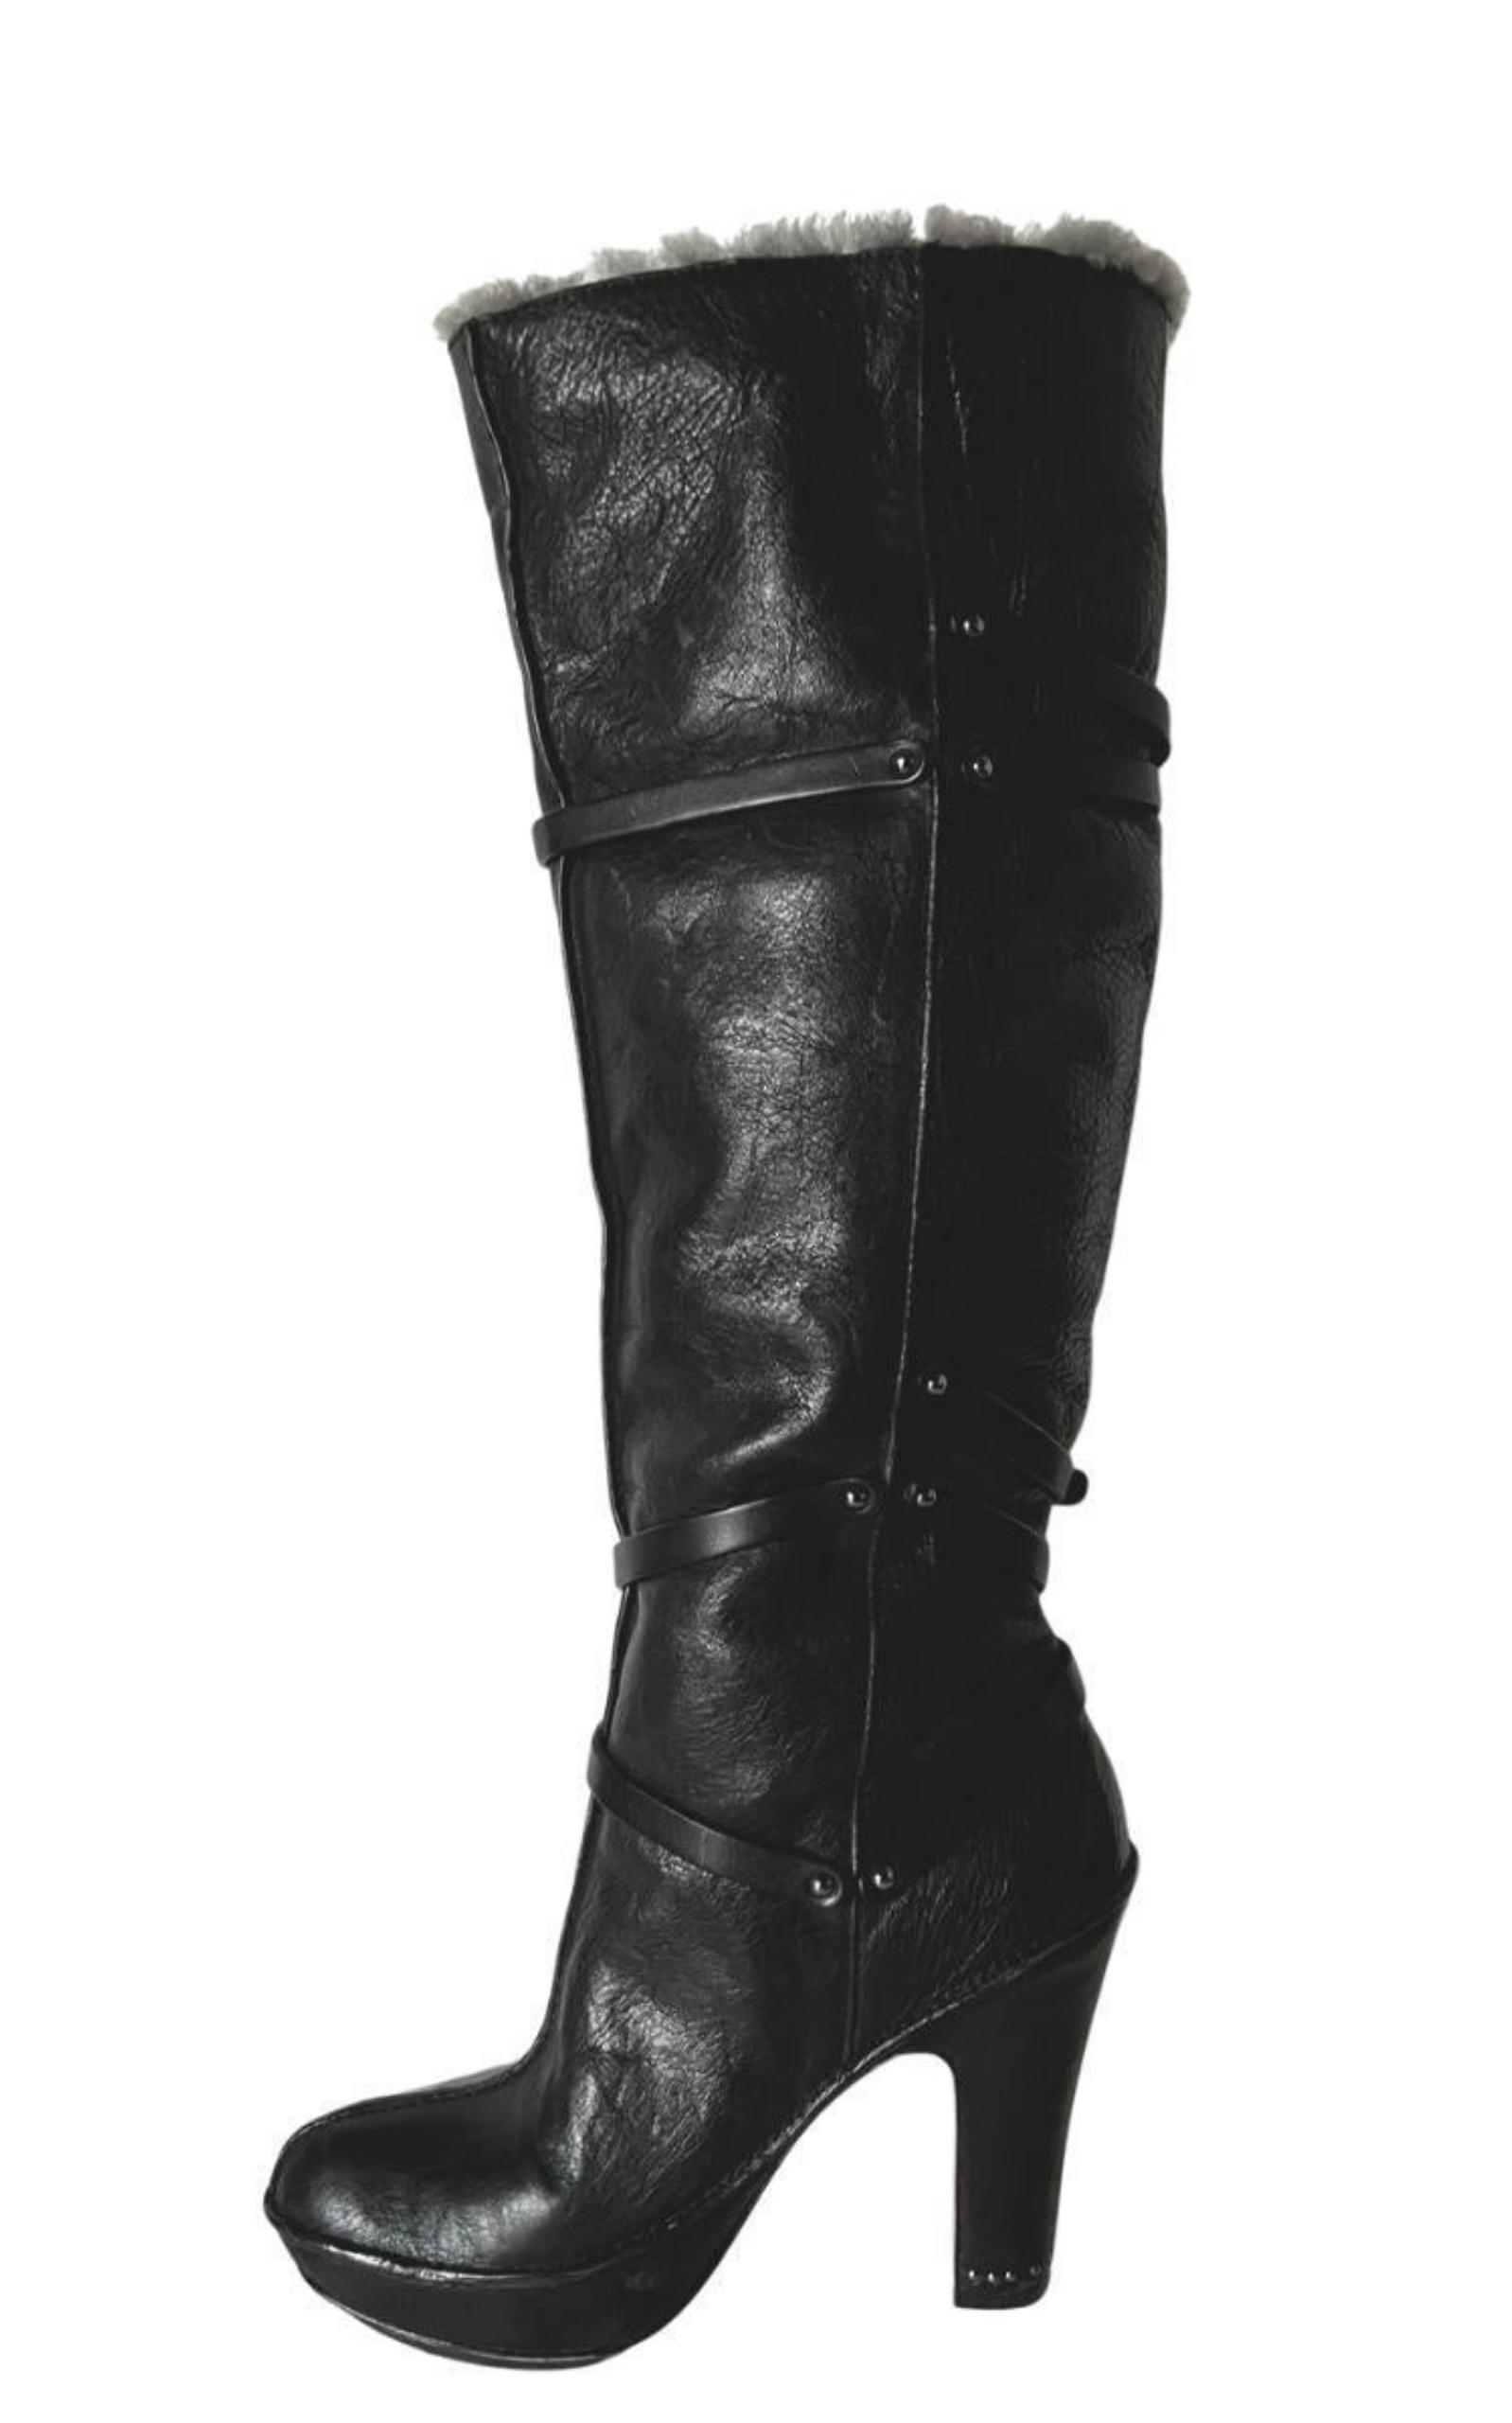 BCBGMAXAZRIA Molly Black Leather Boots with Shearling Lining | Runway ...